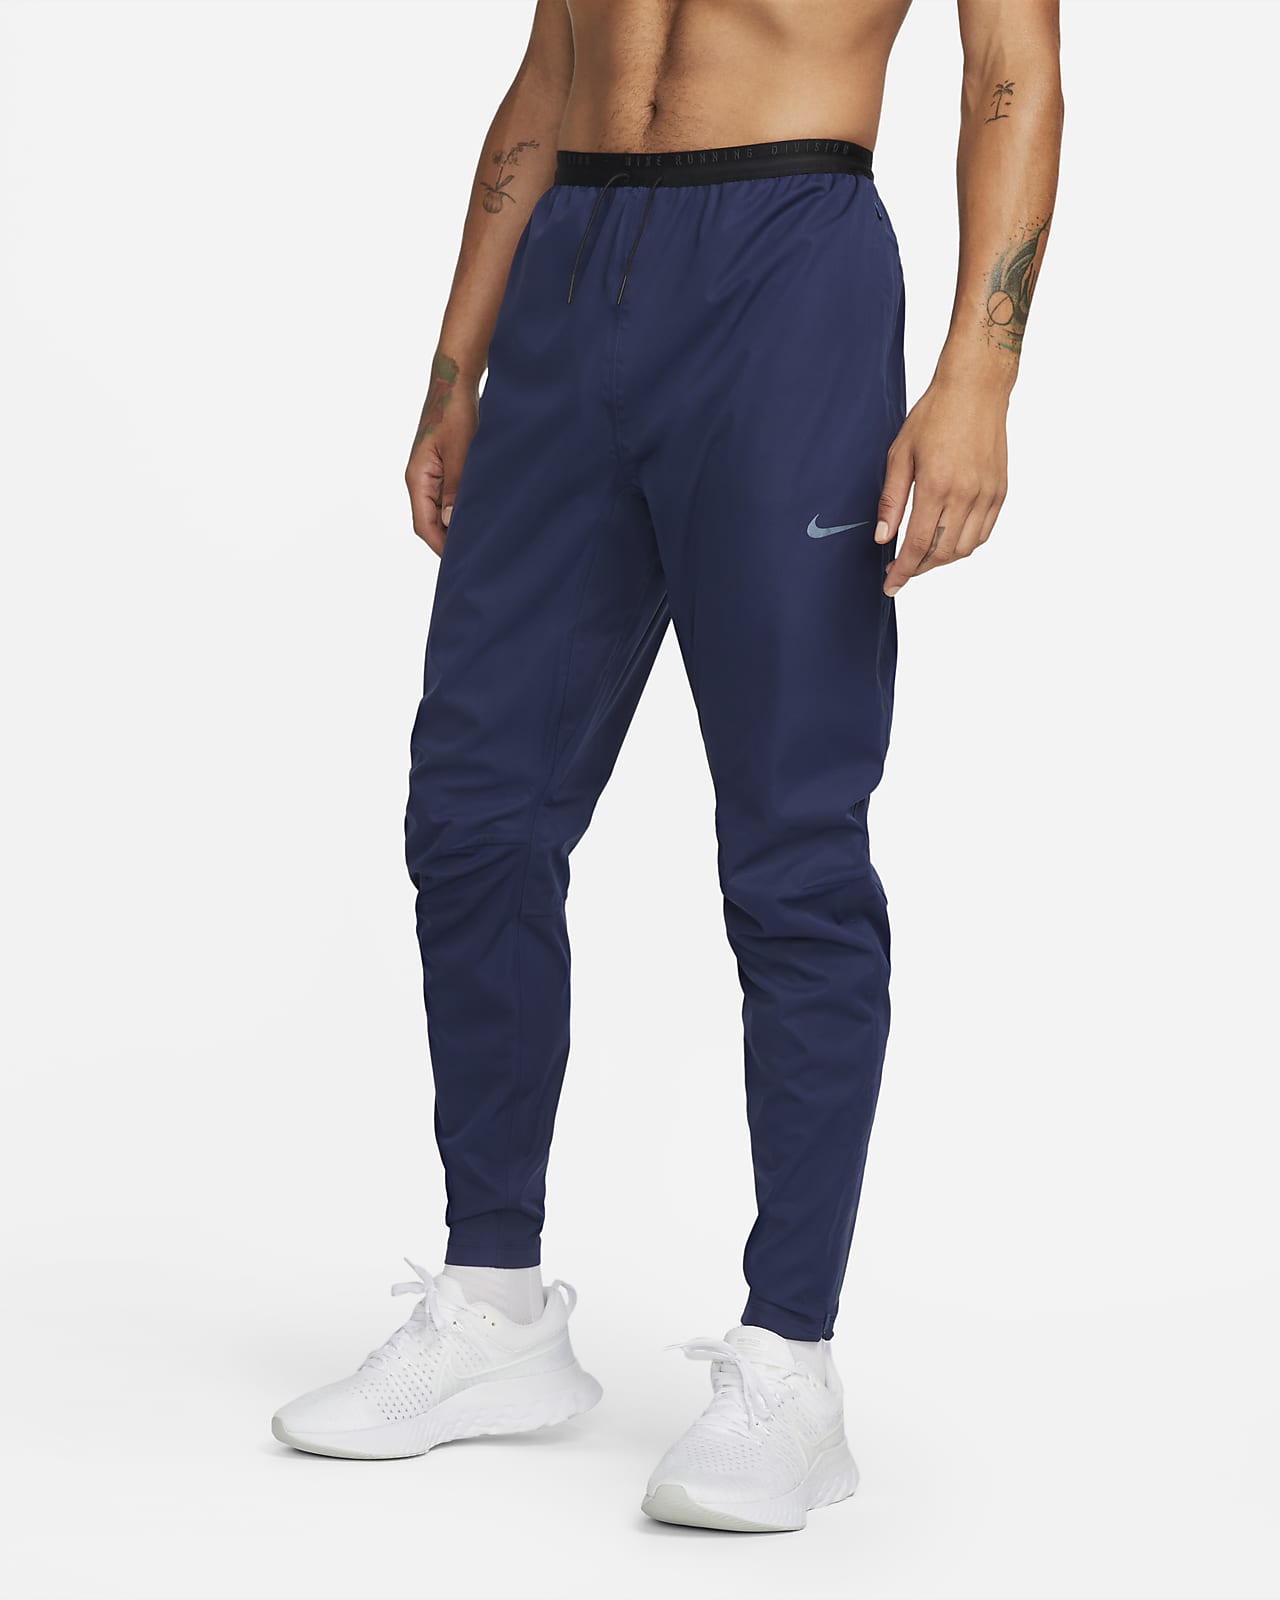 Nike Pro Elite Storm Pants and Wind Pants size Small Navy color set new   eBay